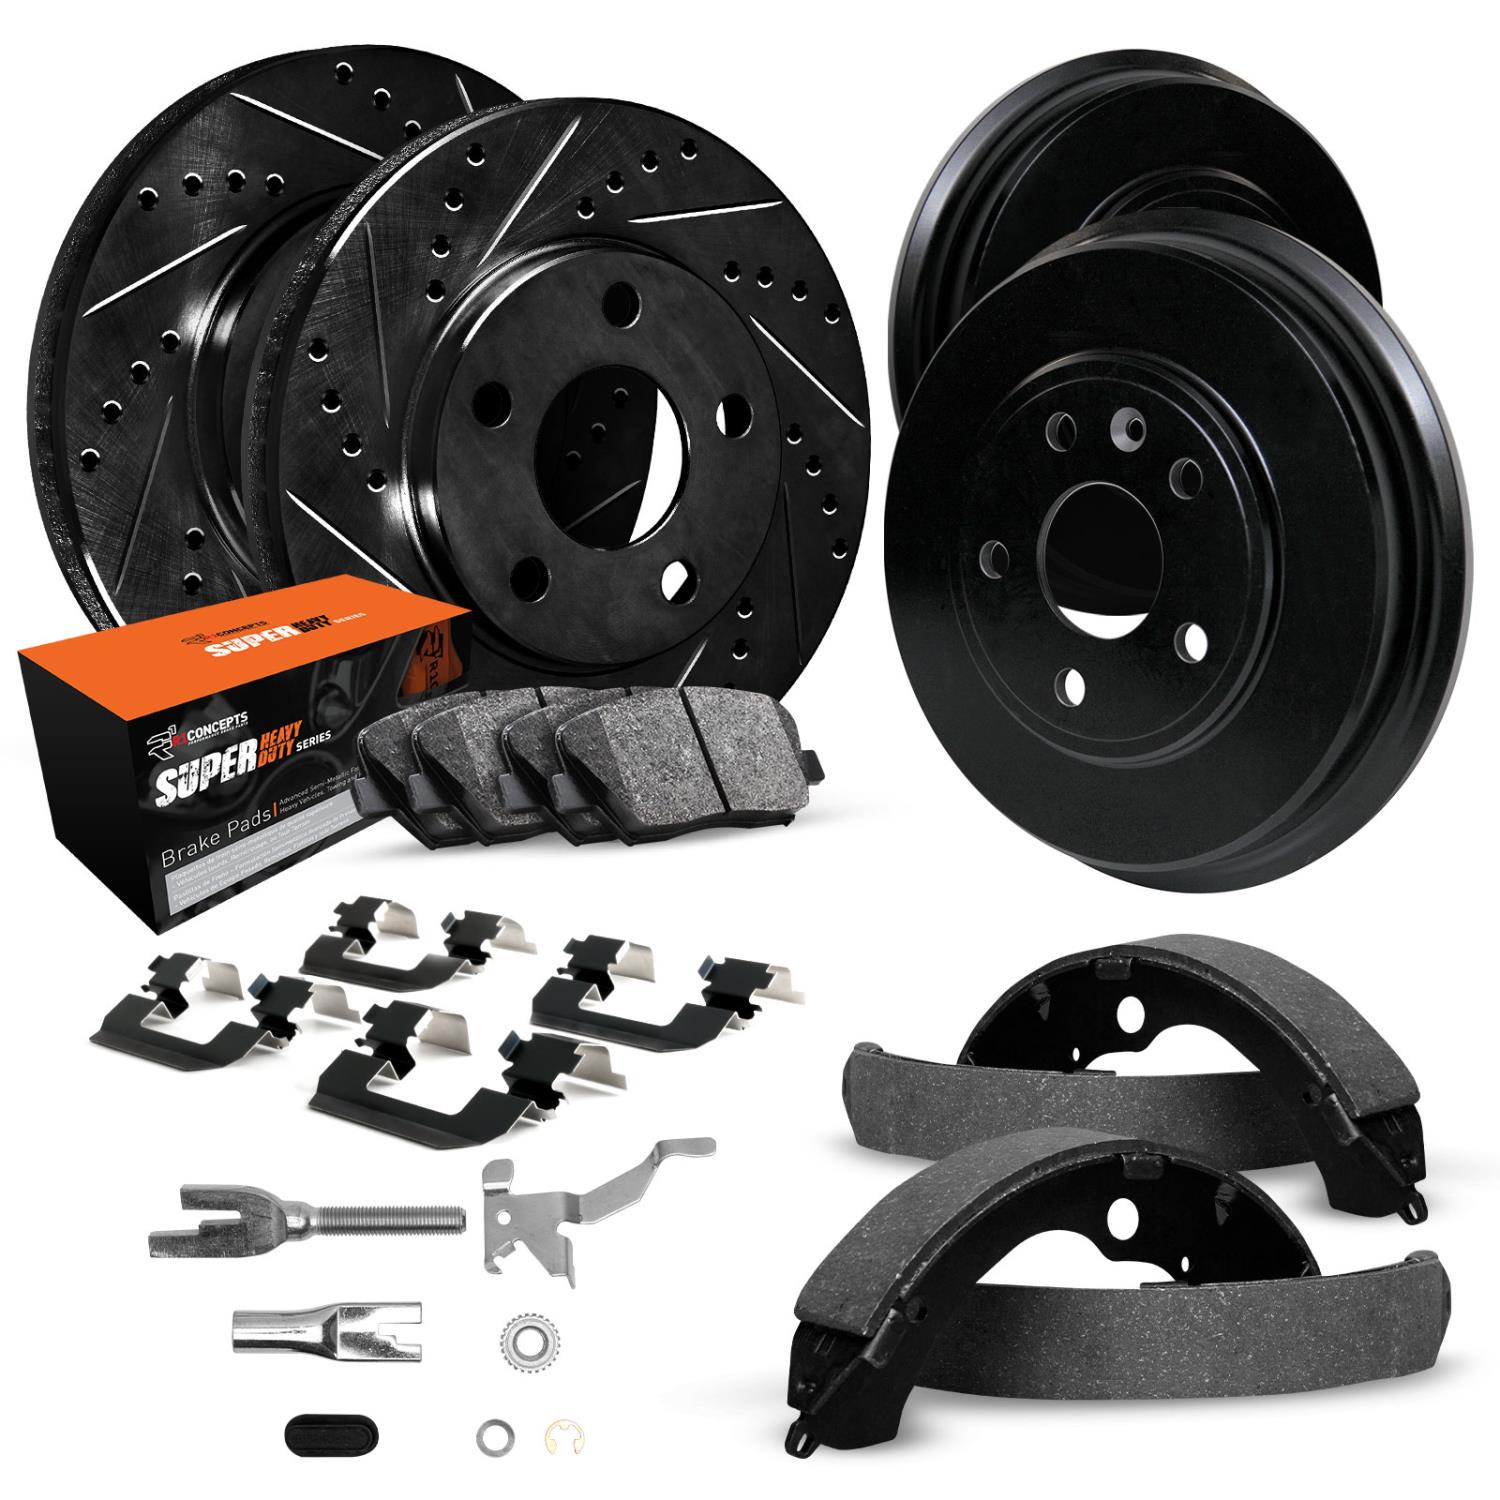 E-Line Slotted Black Brake Rotor & Drum Set w/Super-Duty Pads, Shoes, Hardware/Adjusters, 1973-1973 Ford/Lincoln/Mercury/Mazda